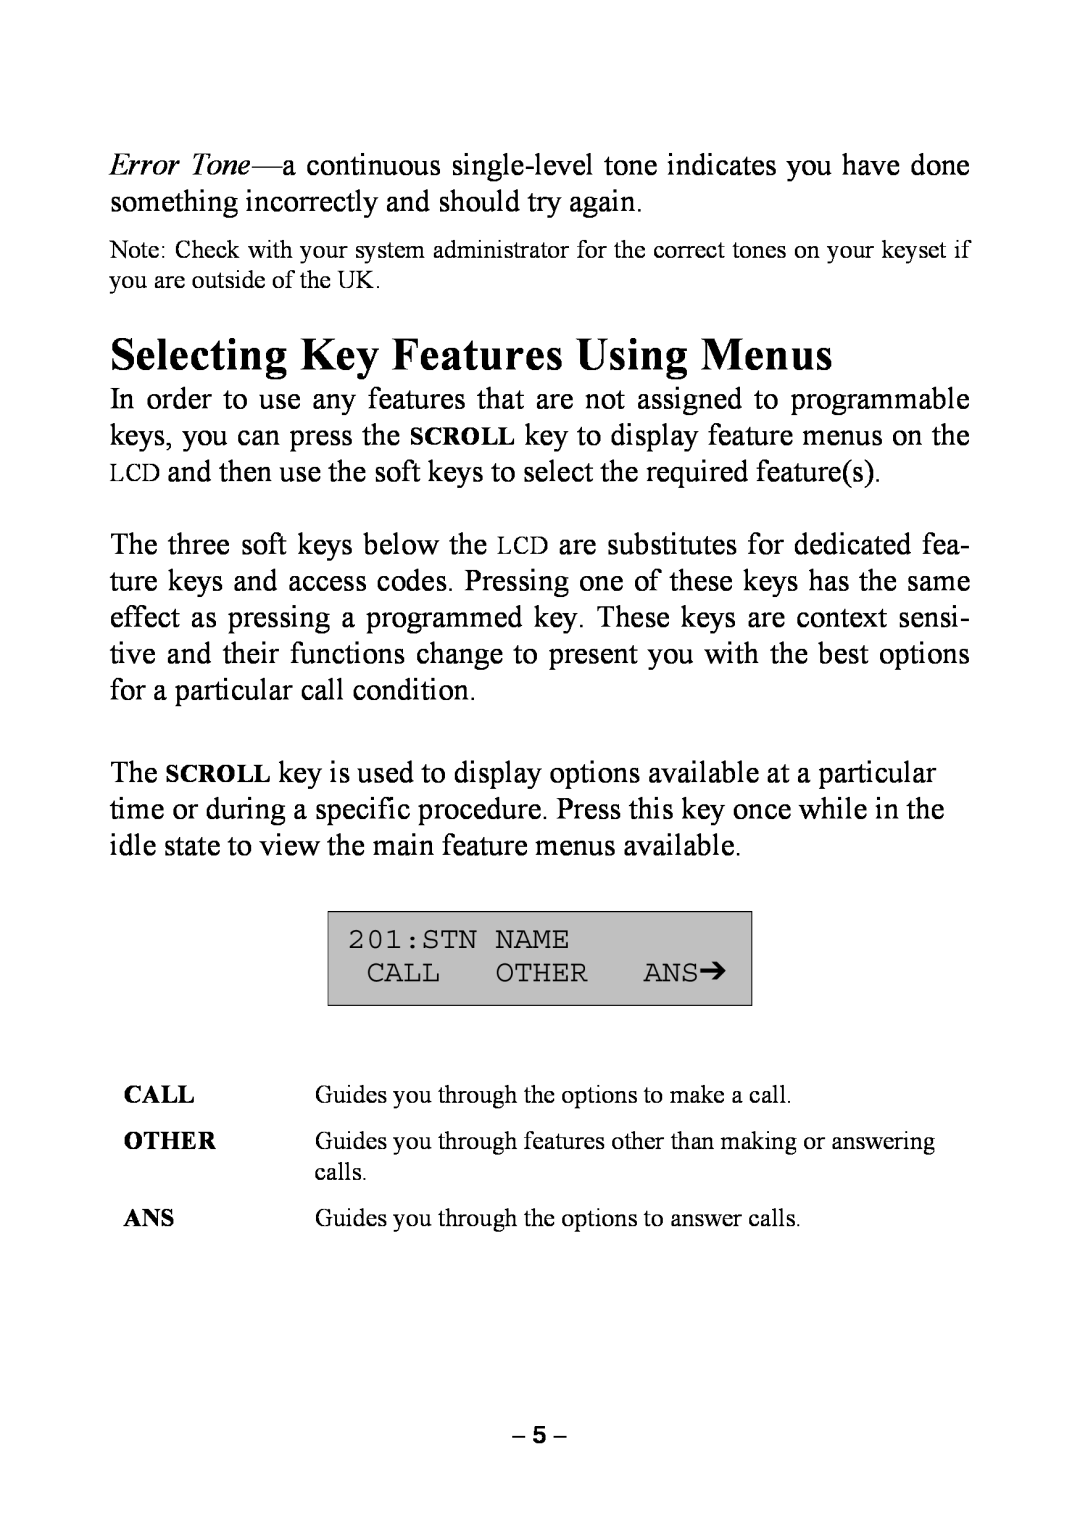 Samsung DCS KEYSET manual Selecting Key Features Using Menus, 201STN, Name, Call, Other Ans 